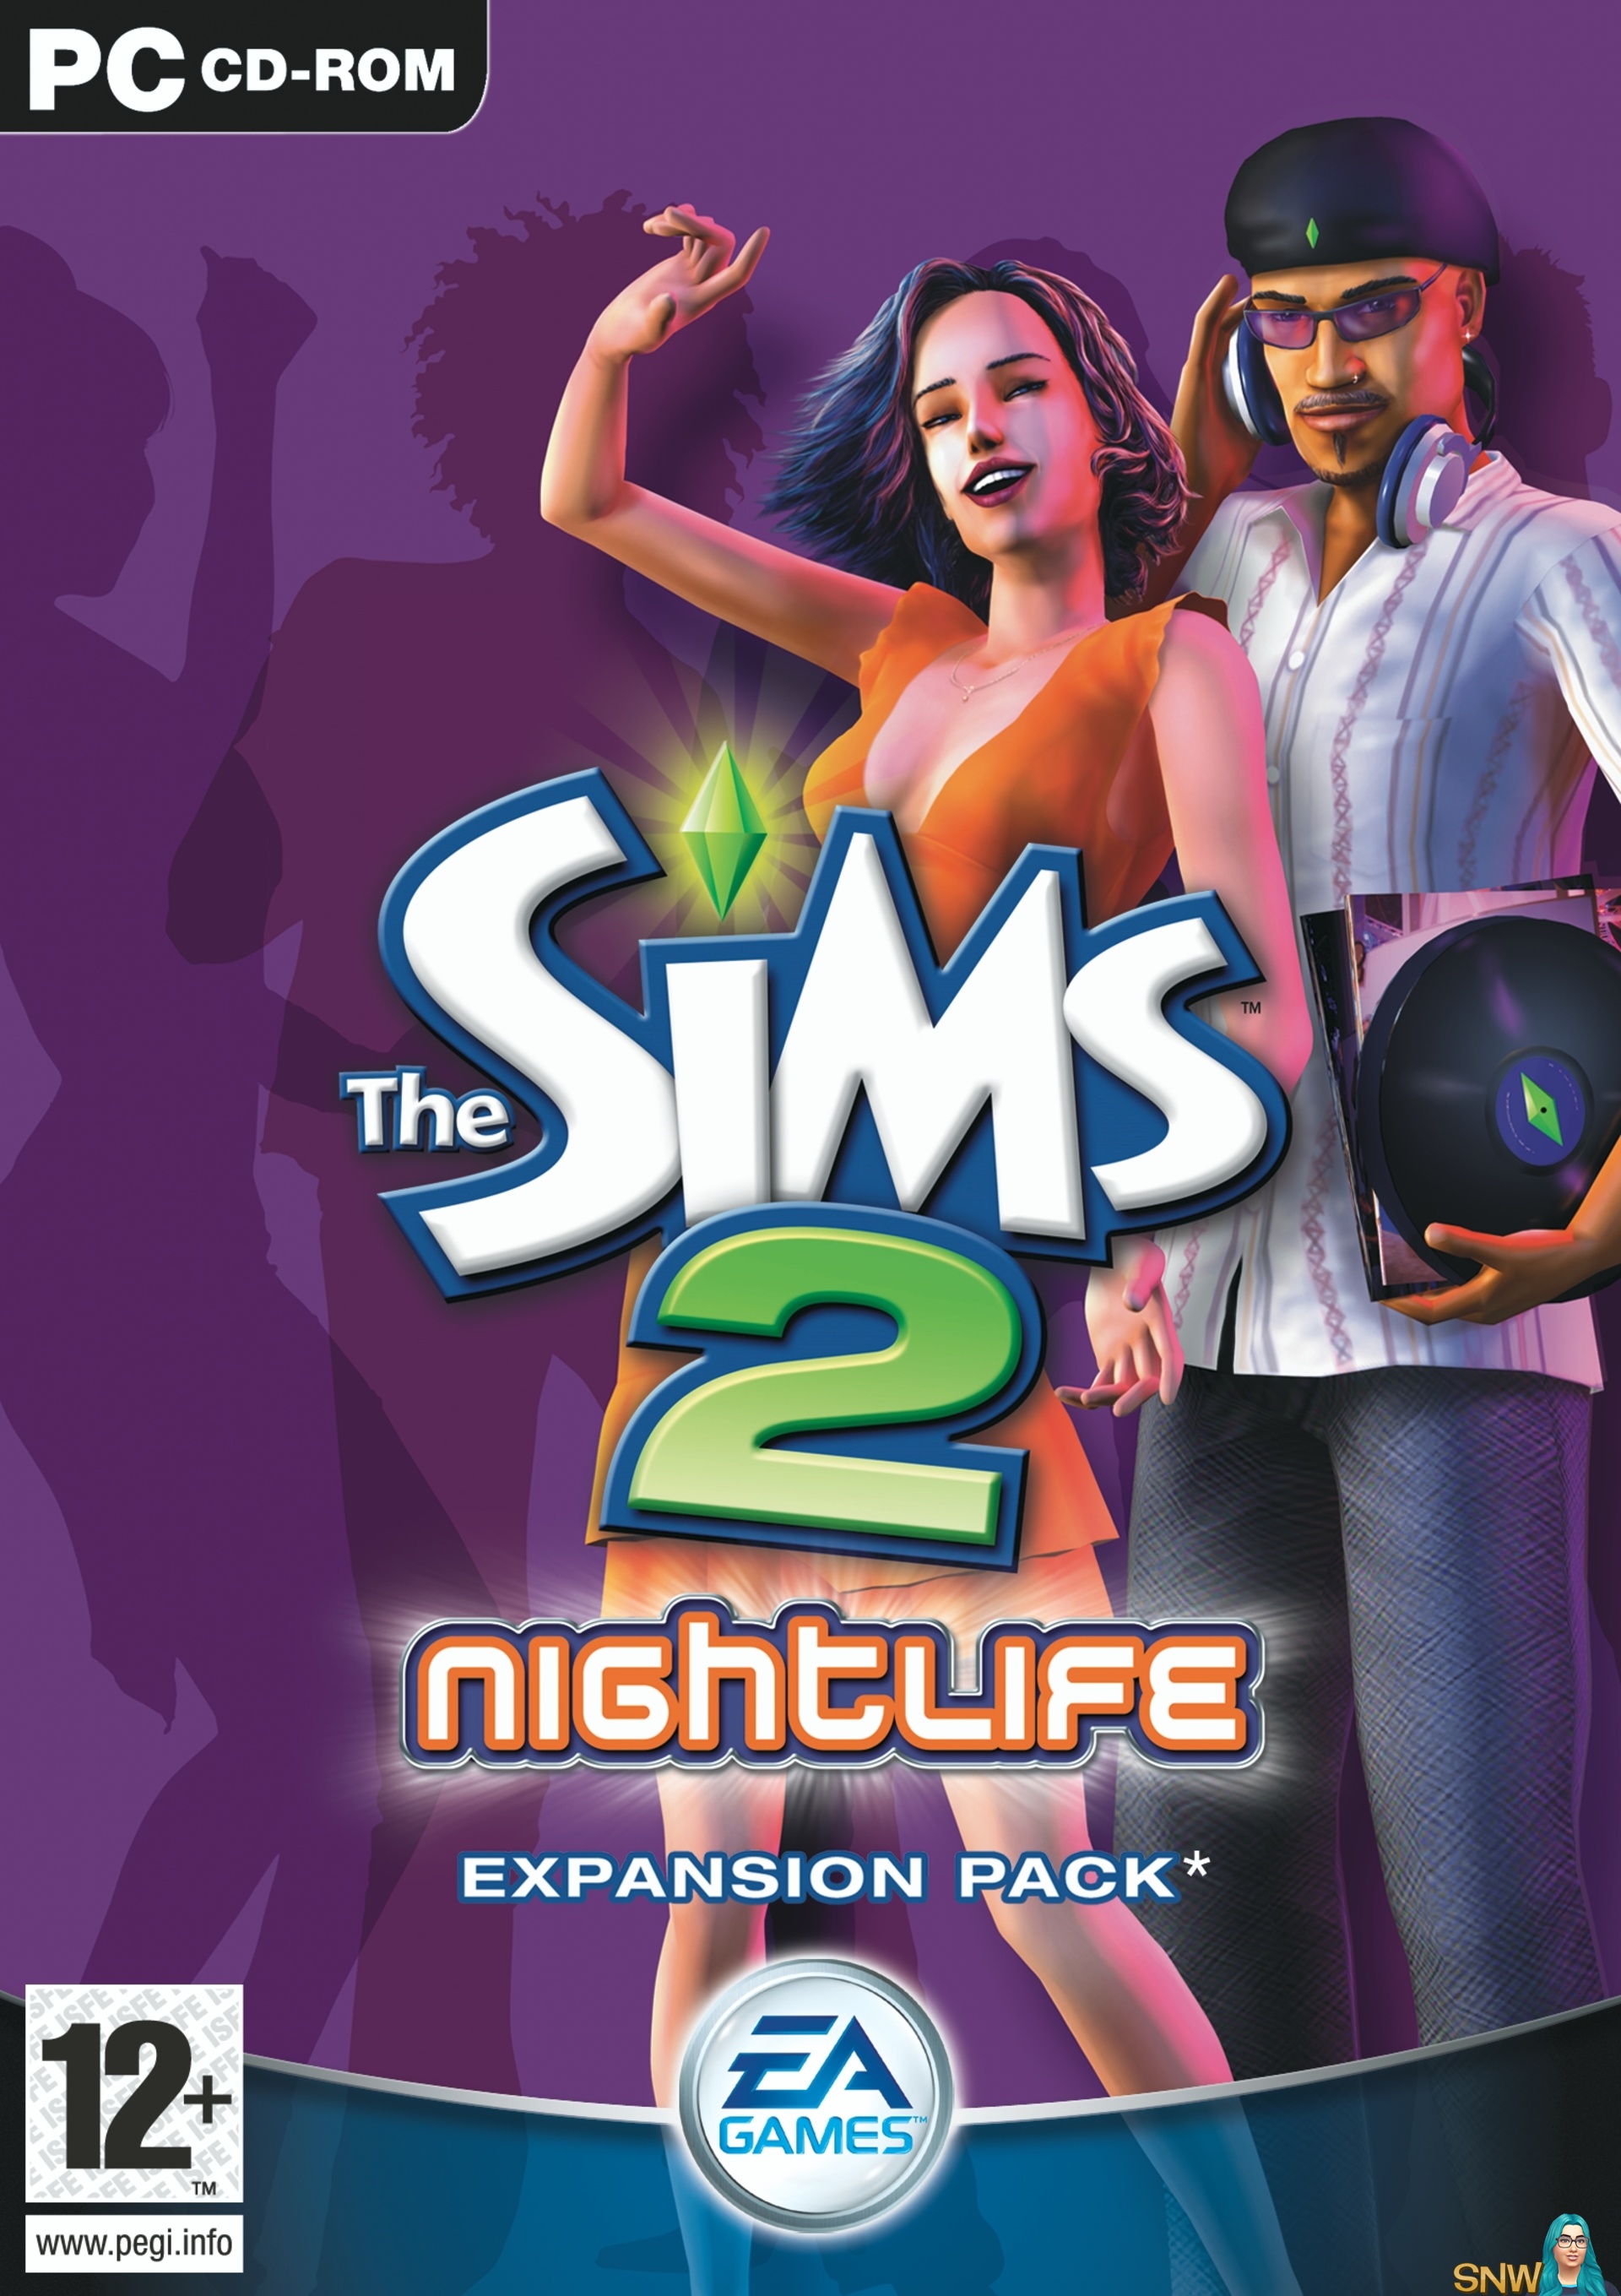 The Sims Online, SNW